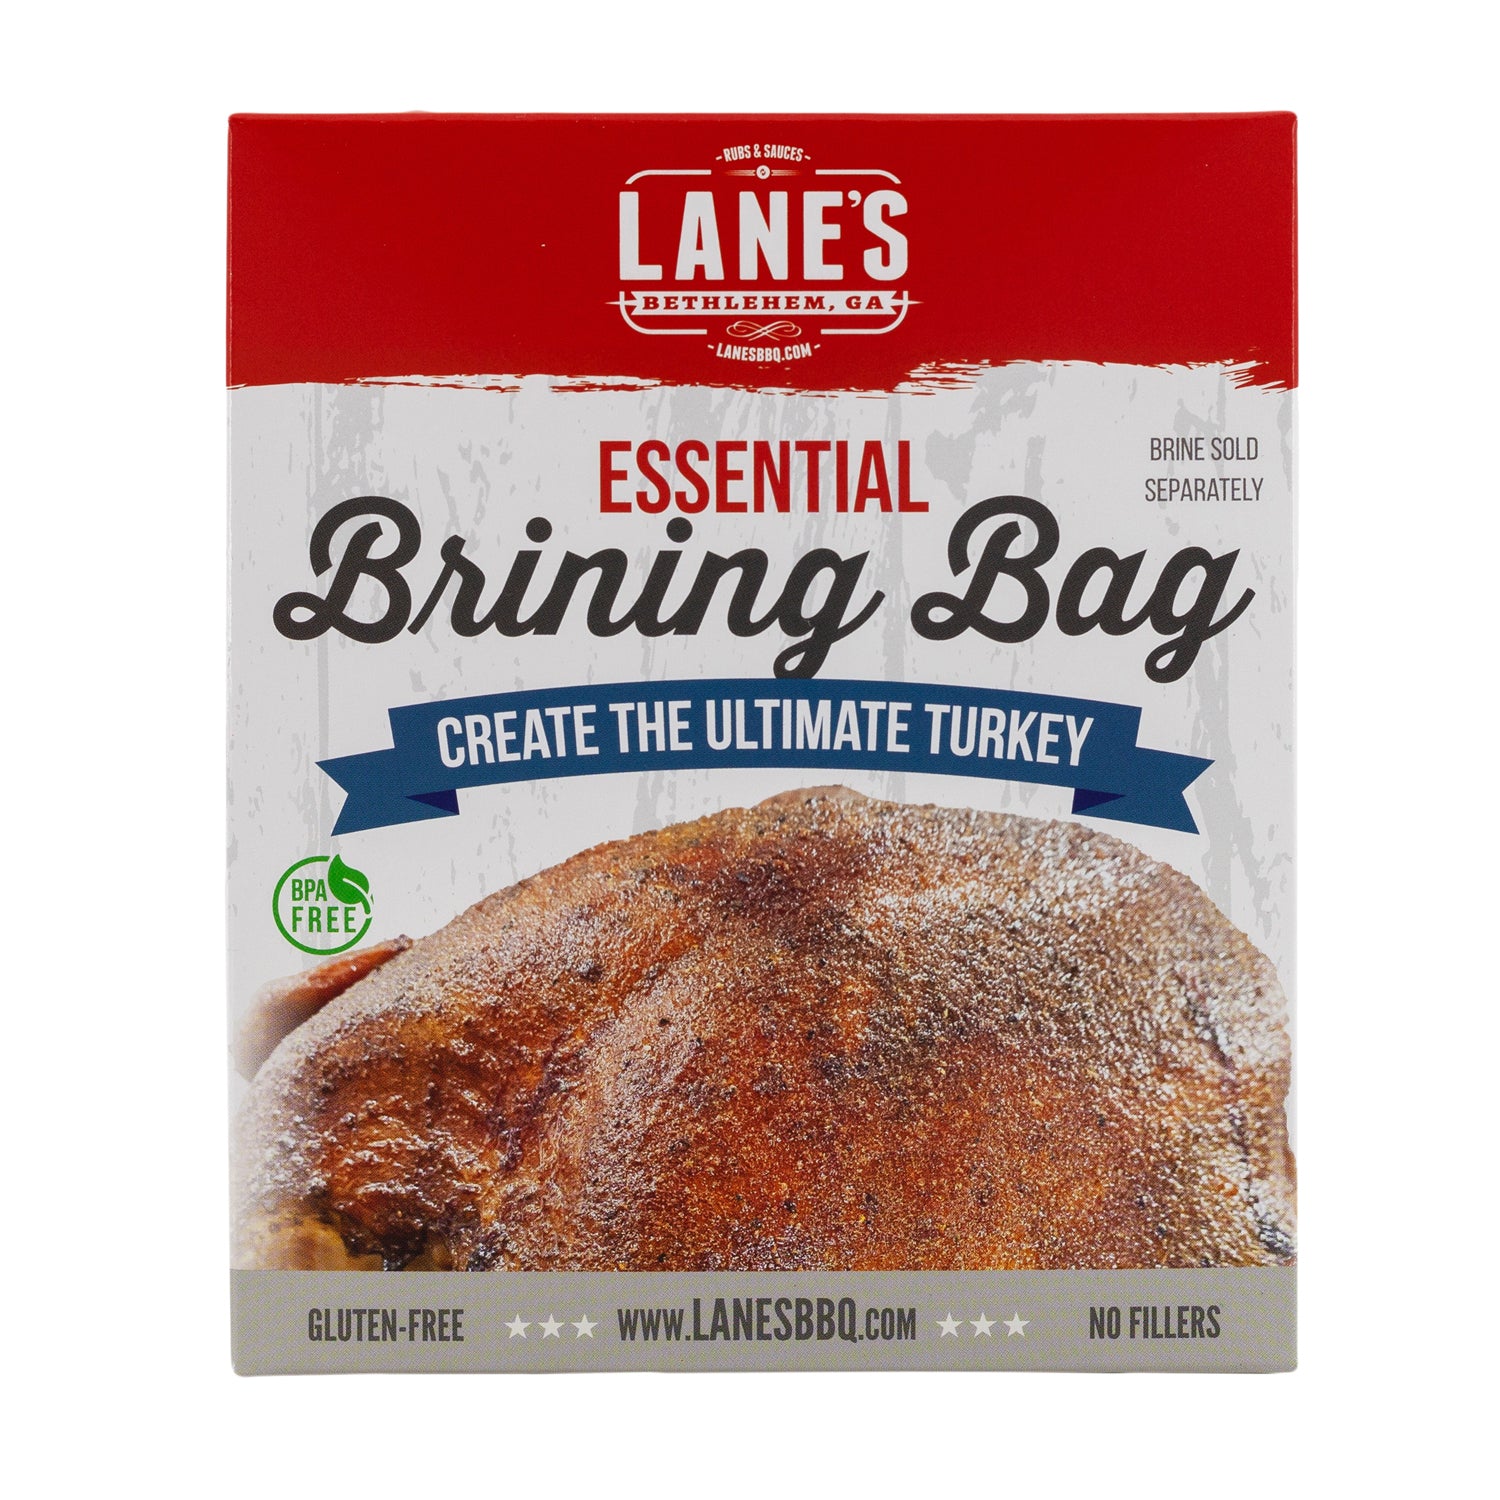 To Brine or to Bag? That is the question